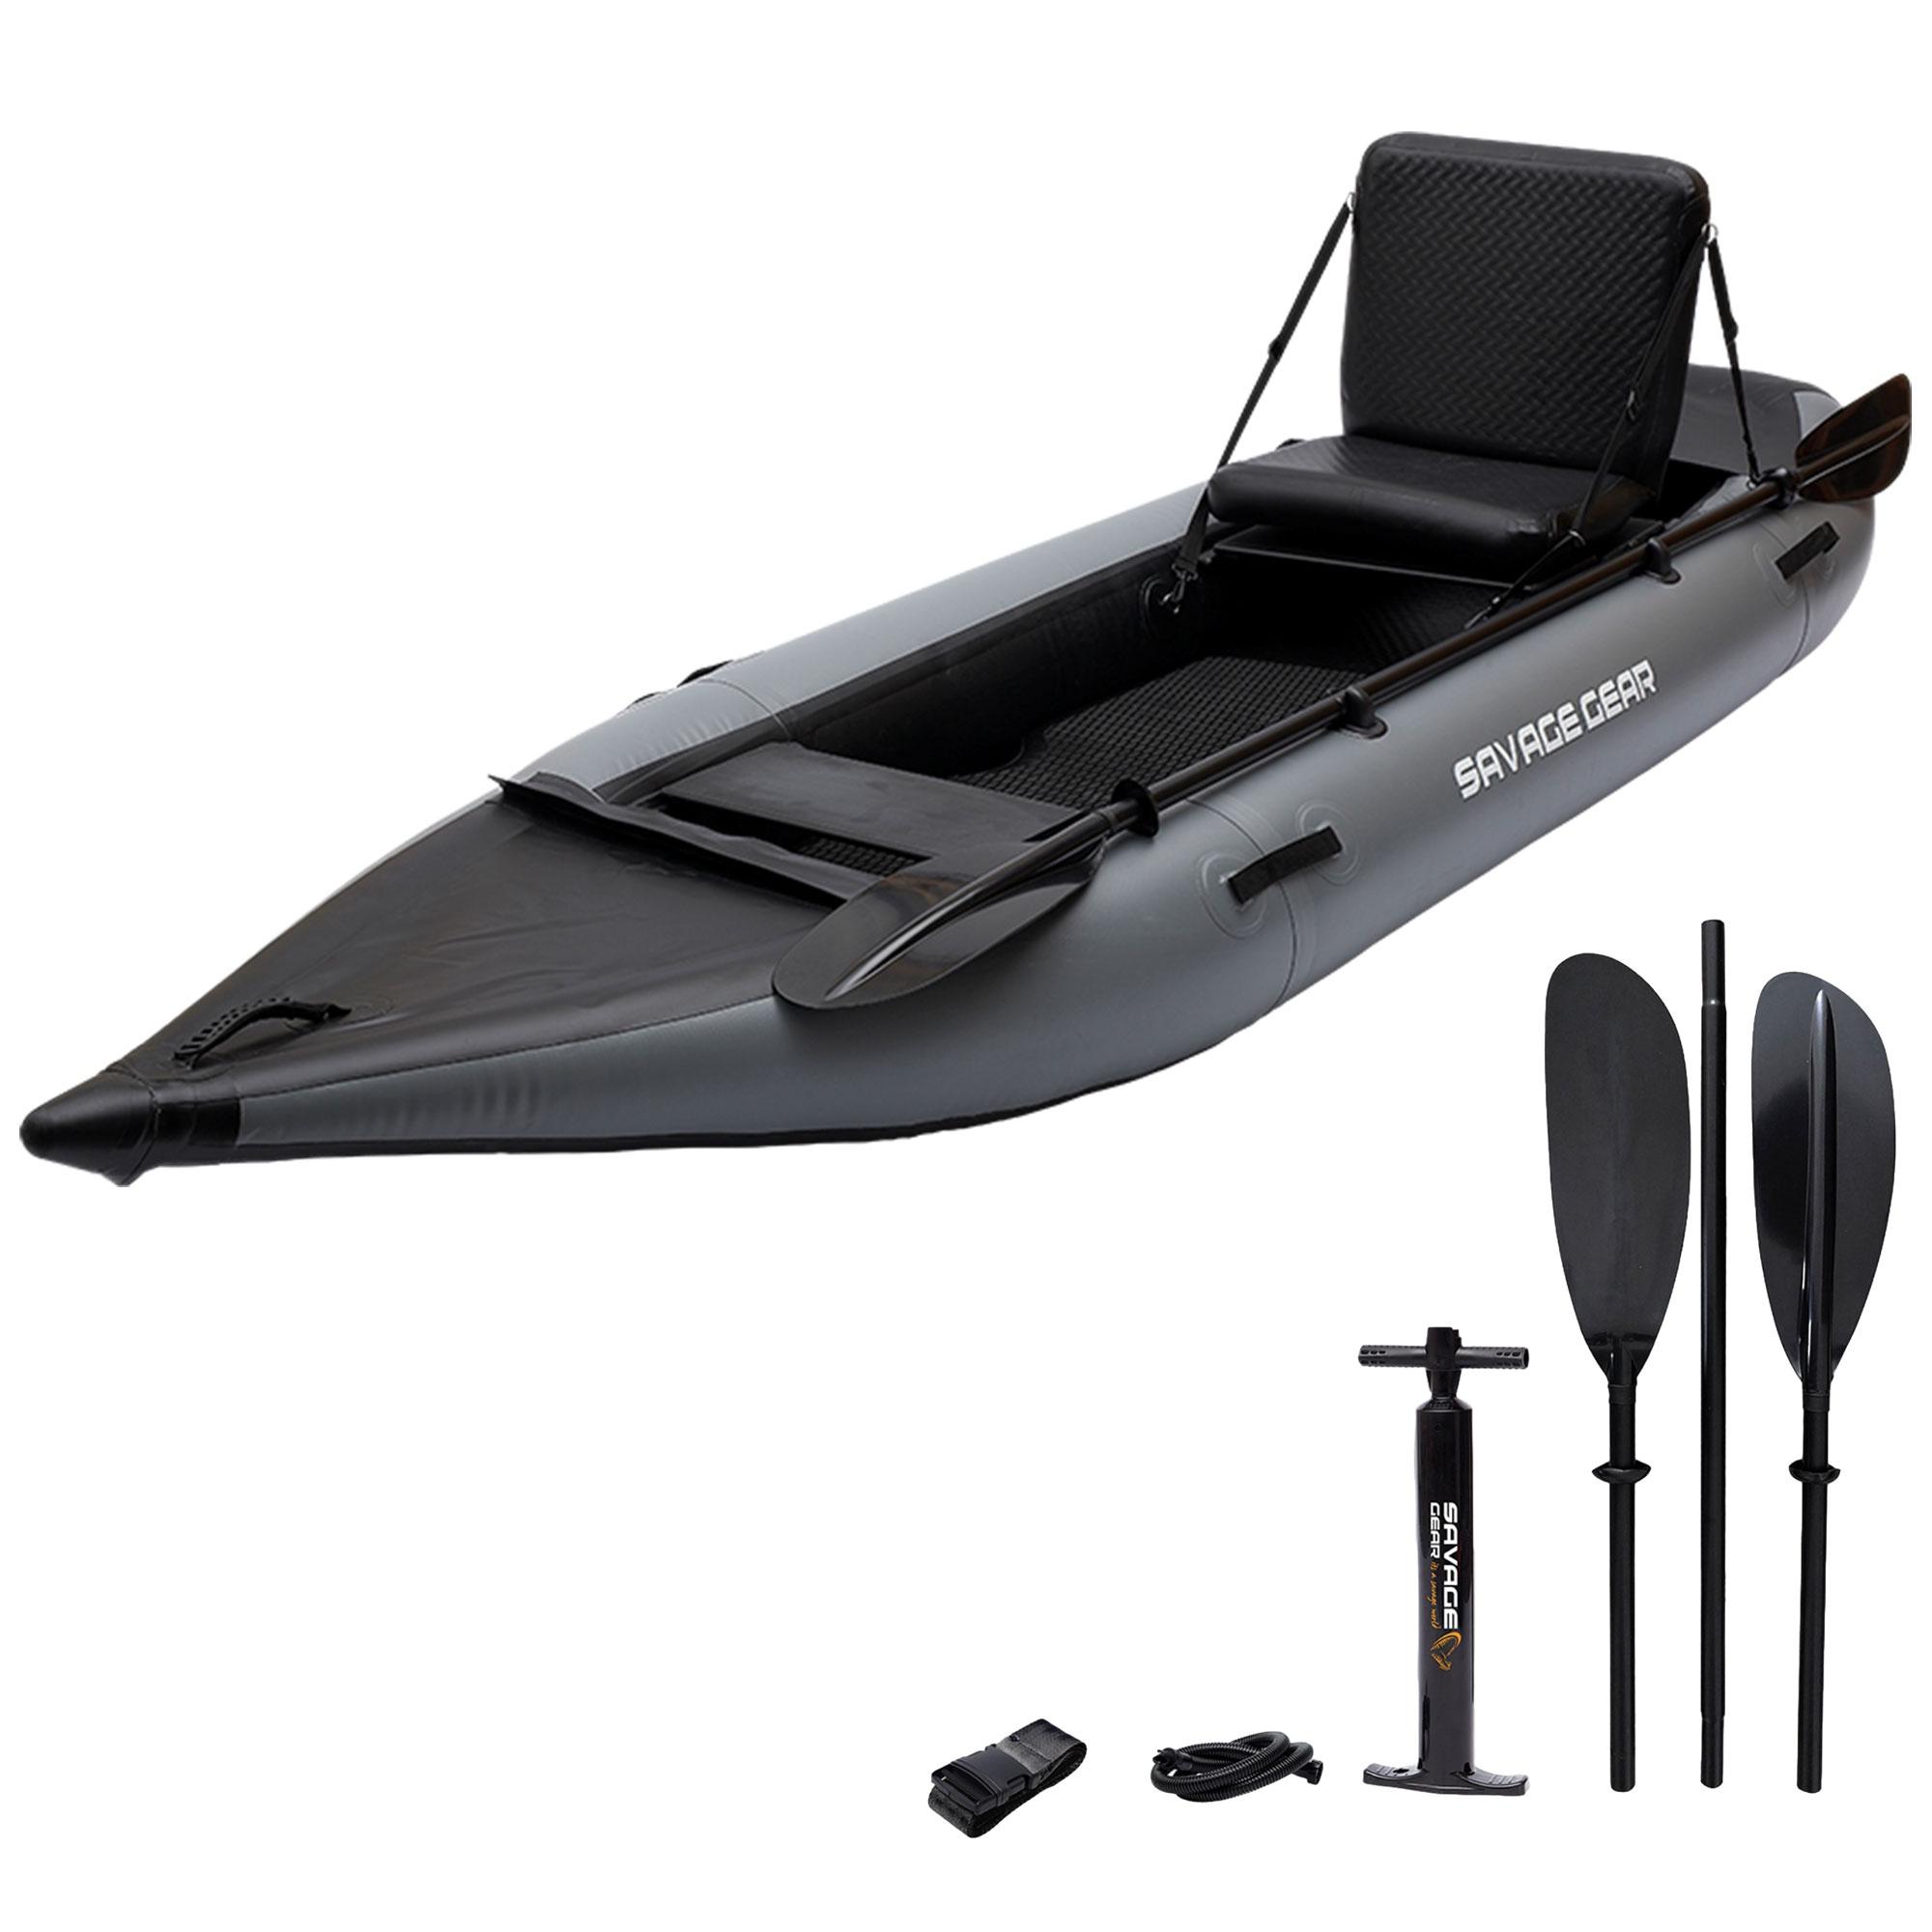 2 Person Inflatable Kayak, Fishing PVC Kayak Boat, Inflatable Boat Rescue Rubber Rowing Boat with Pump, Aluminum Alloy Seat, Paddle, Inflatable Mat, Repair Kit, Fin 440lb Weight Capacity - image 1 of 10